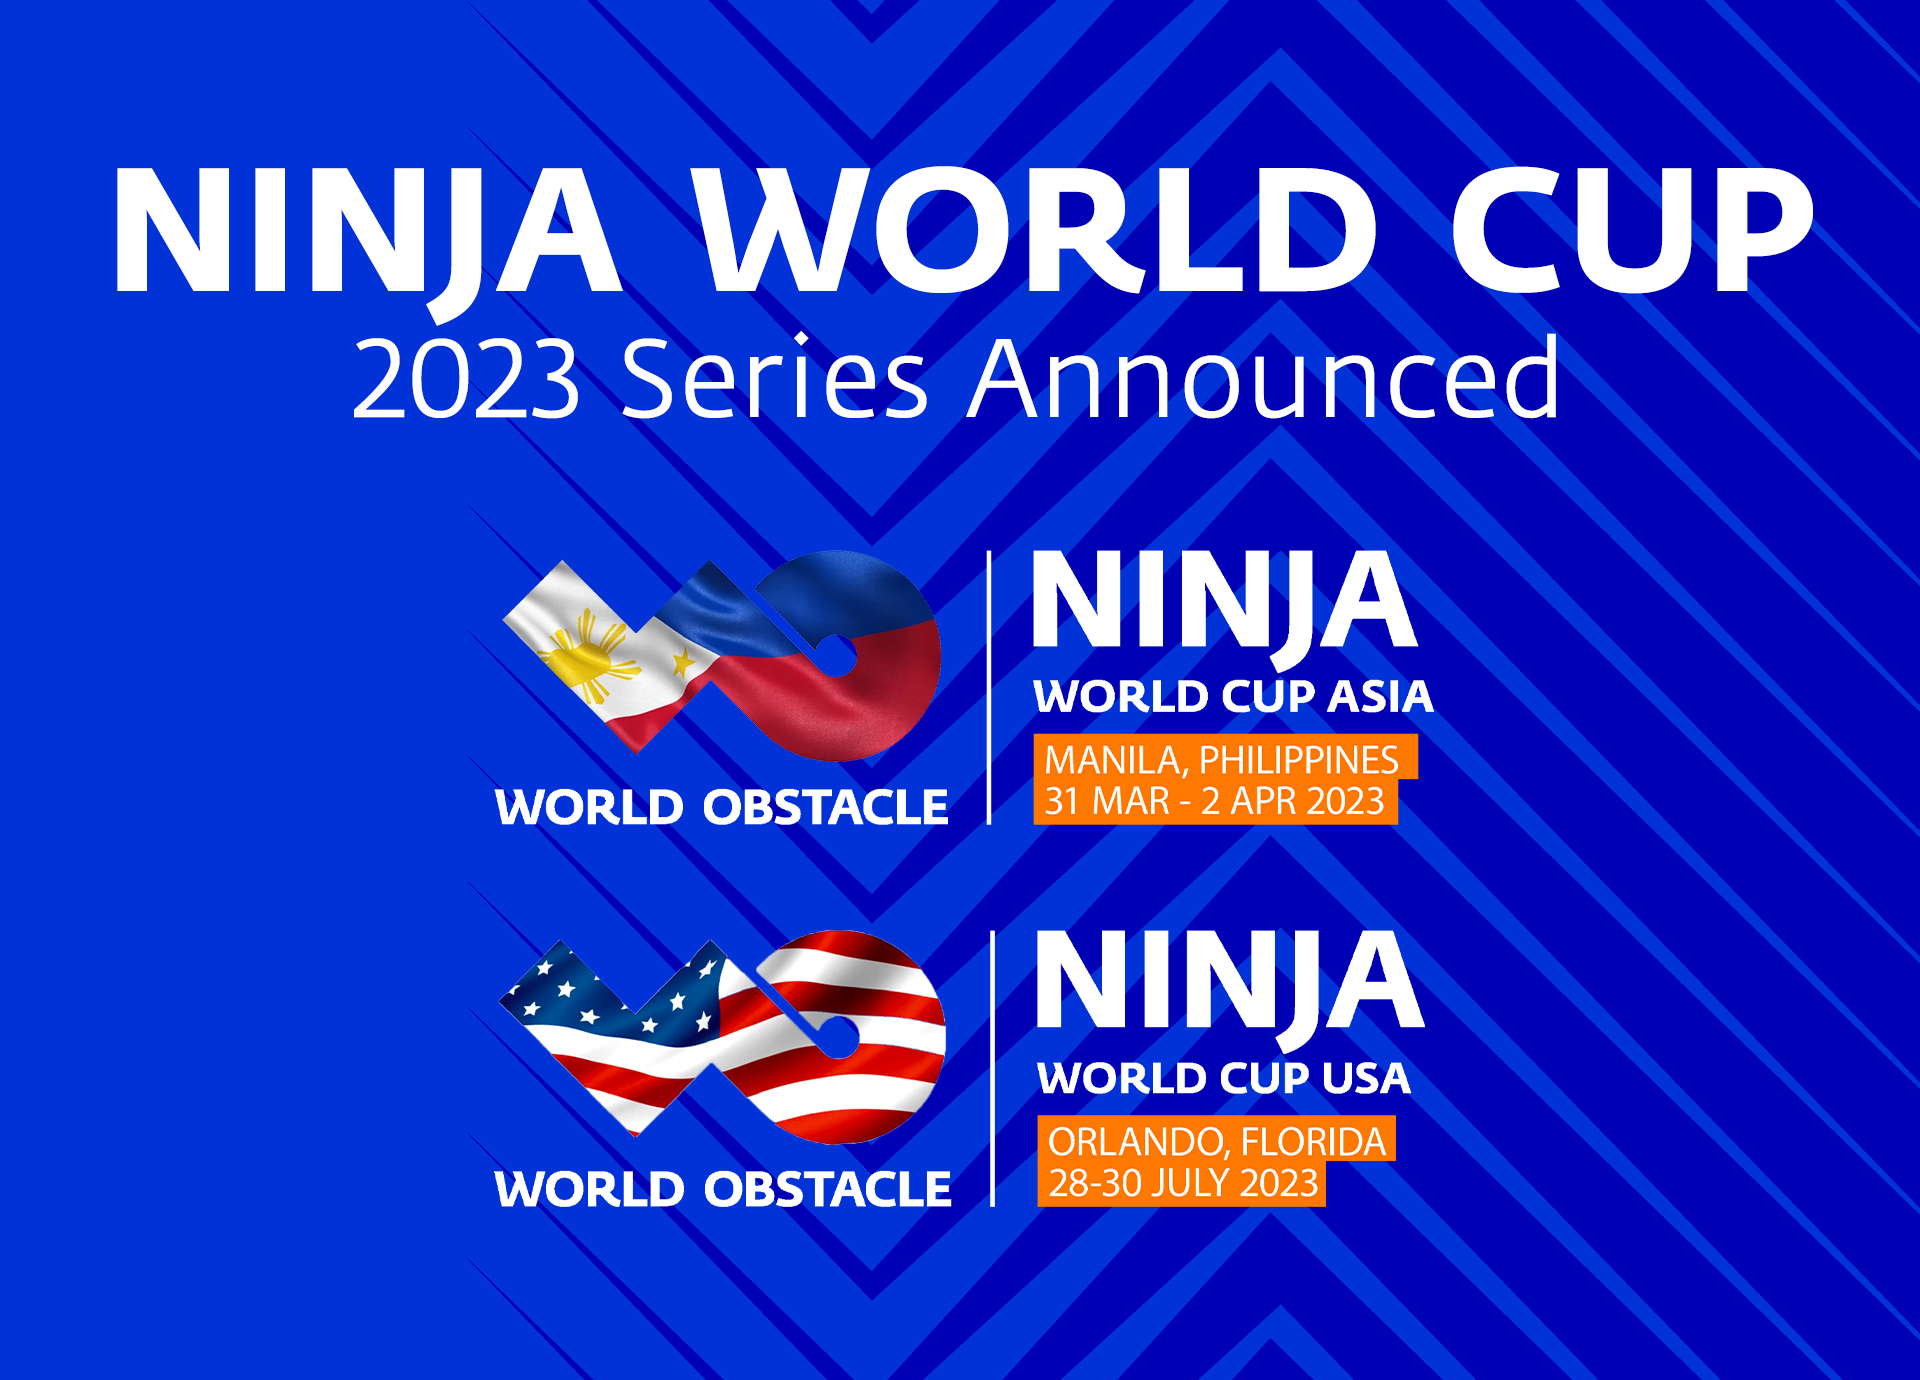 https://www.worldobstacle.org/wp-content/uploads/2023/01/2023-Ninja-World-Cup.png